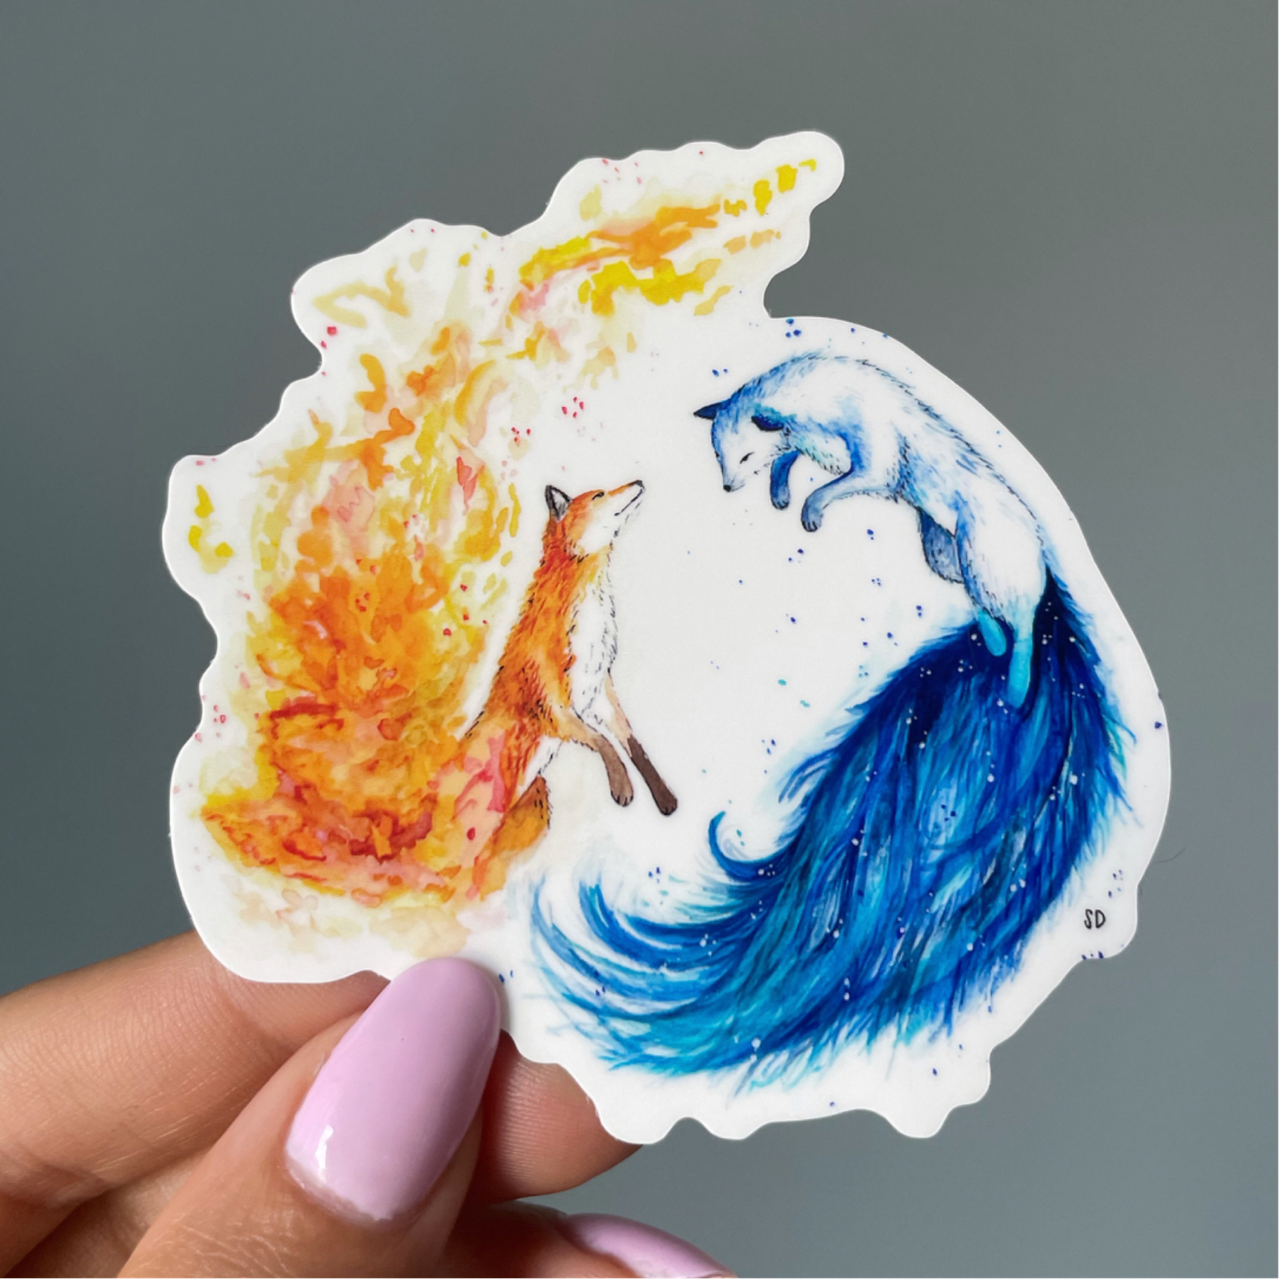 A close-up image of the waterproof, vinyl, dye-cut sticker depicting a watercolor painting from the Wild Planet Creations wild animal collection of fire and ice foxes.